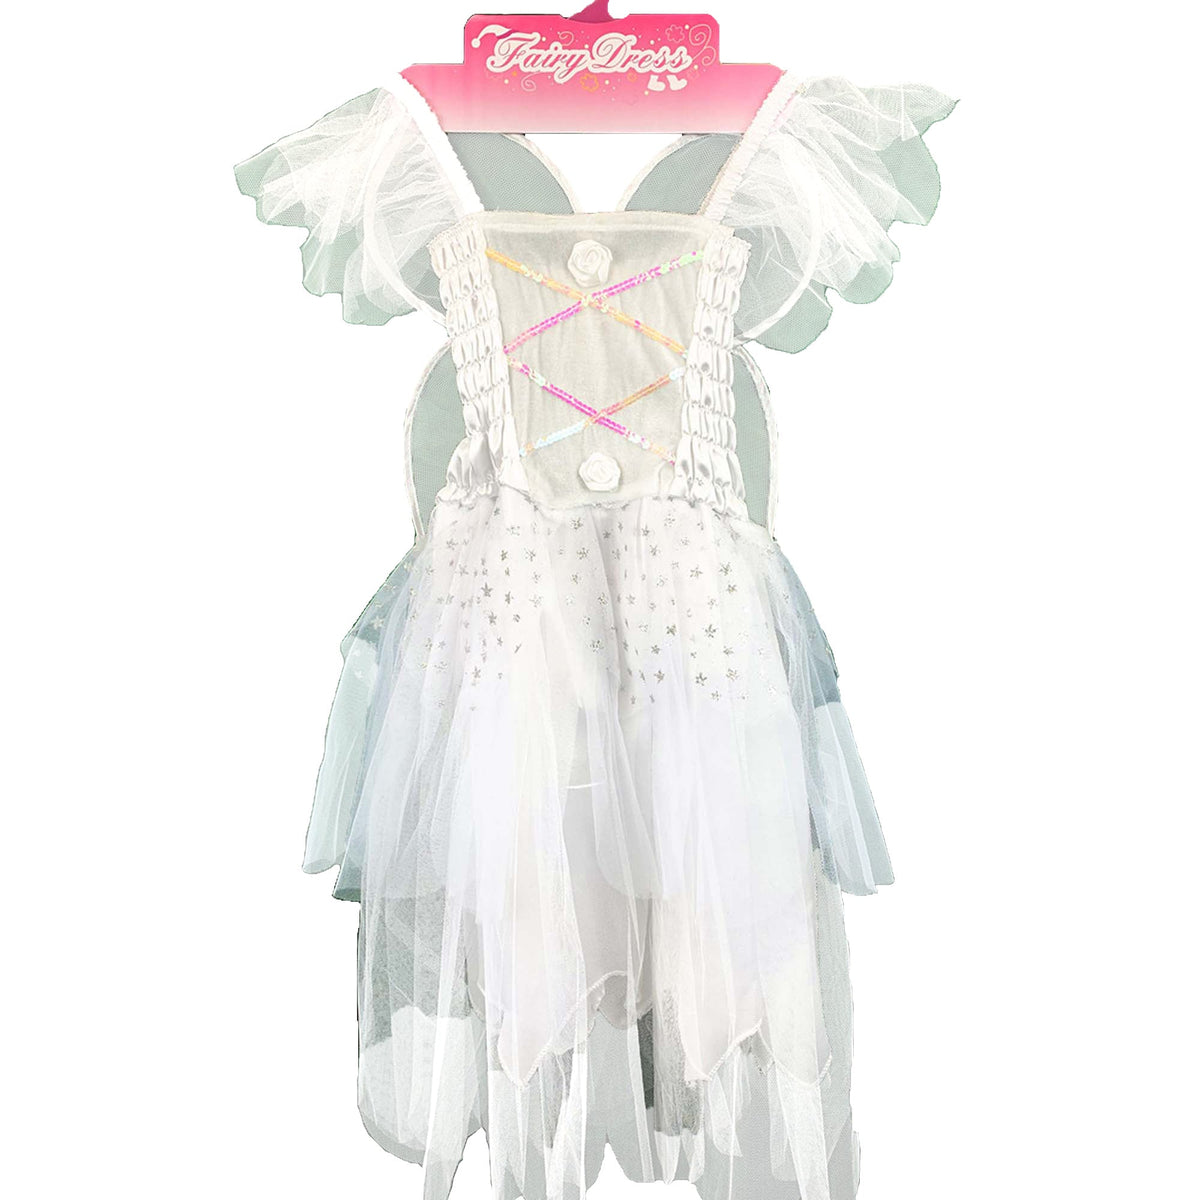 IVY TRADING INC. Costume Accessories White Fairy Dress for Kids